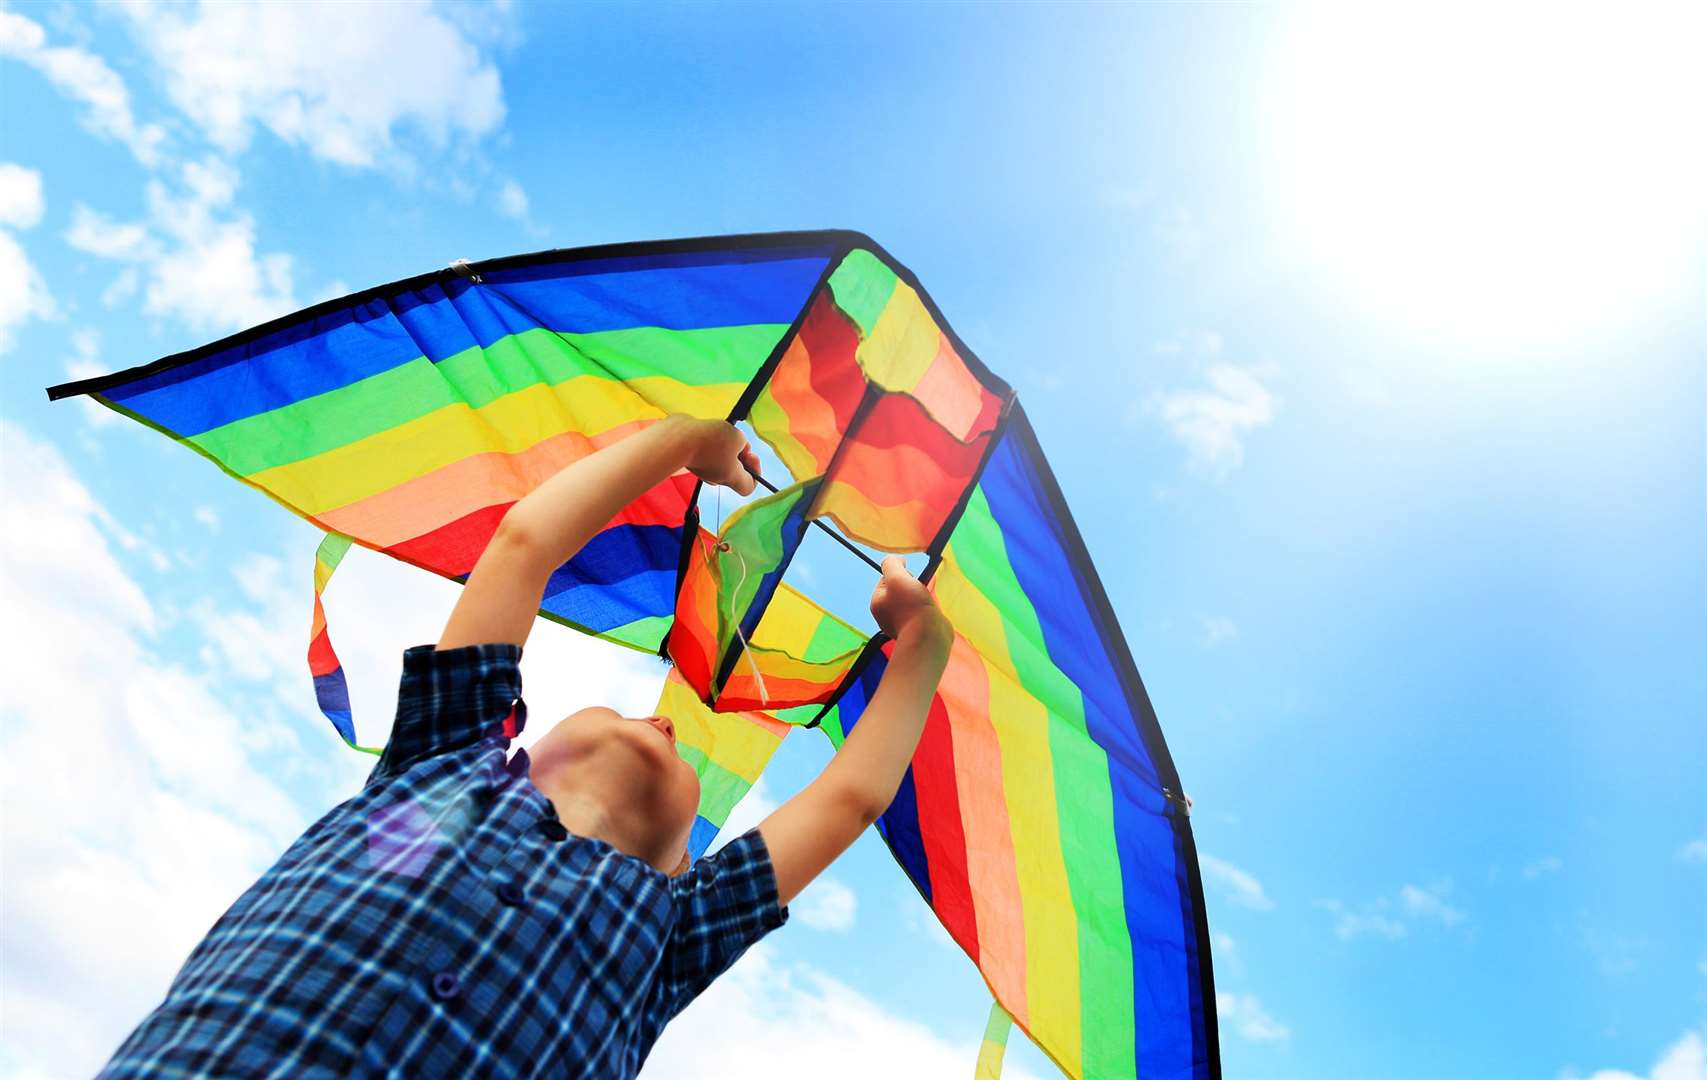 Fly a kite this weekend at Betteshanger Country Park